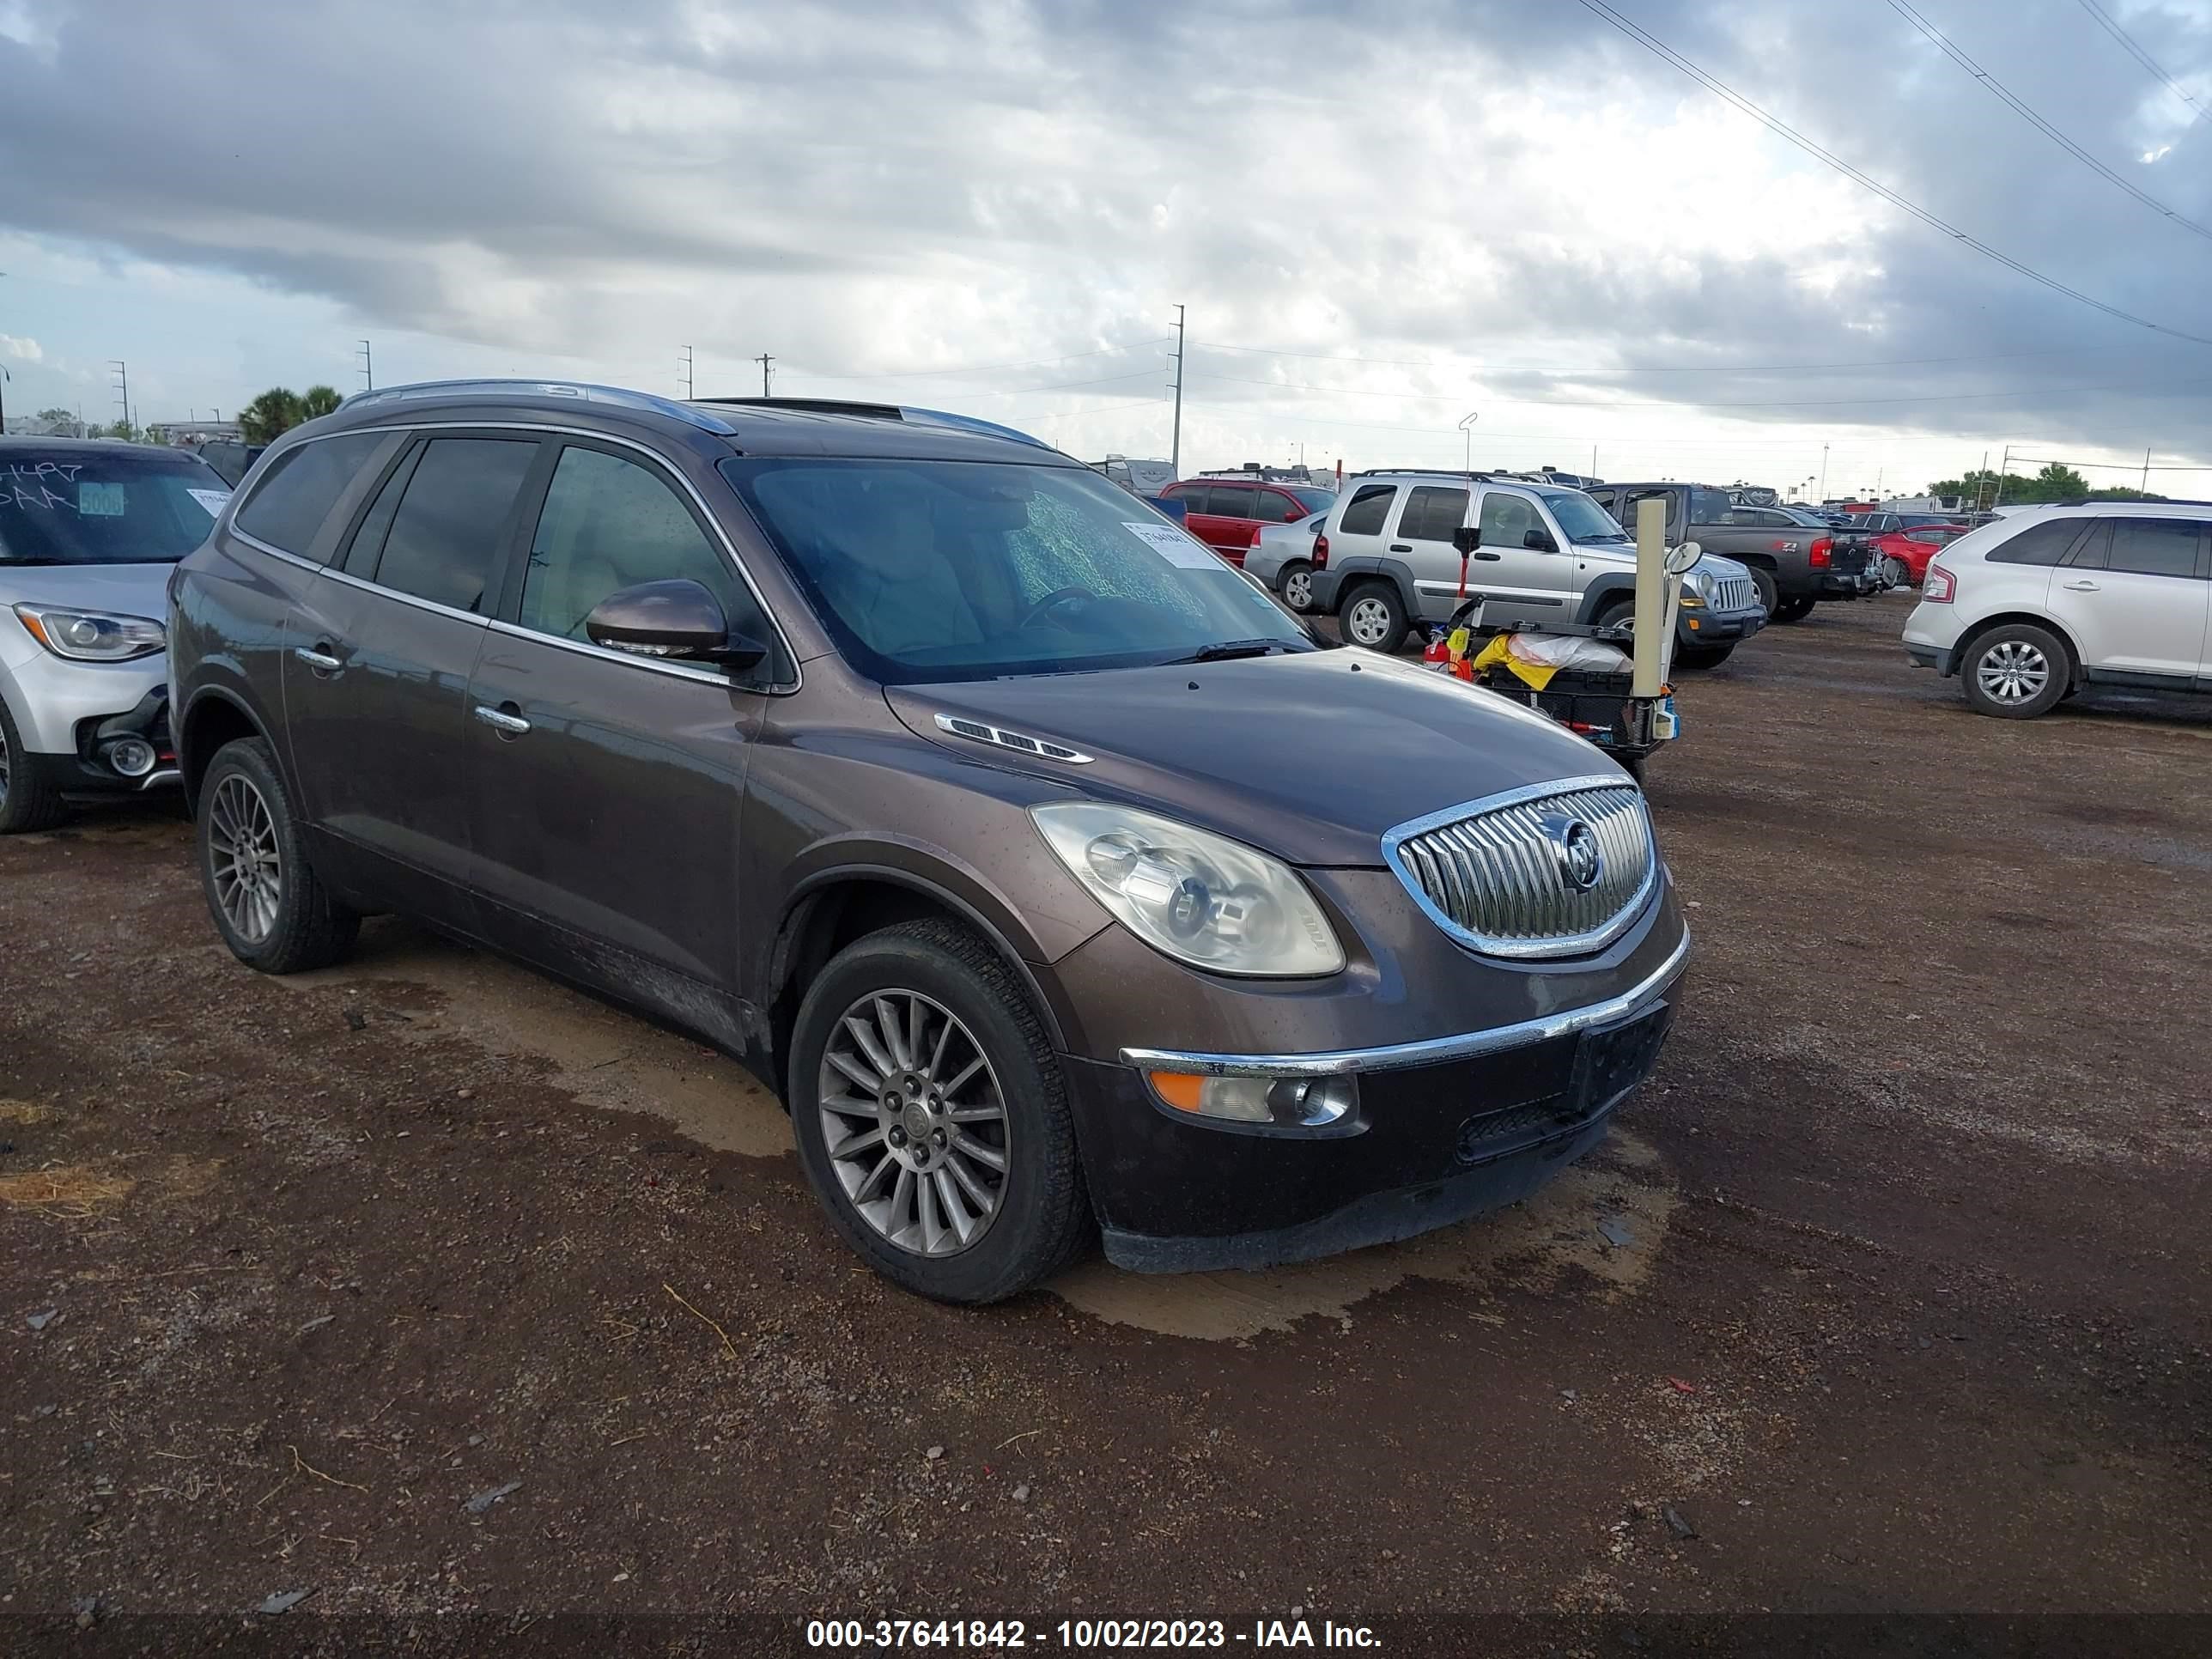 vin: 5GALRBED9AJ164998 5GALRBED9AJ164998 2010 buick enclave 3600 for Sale in 78537, 900 N Hutto Road, Donna, Texas, USA